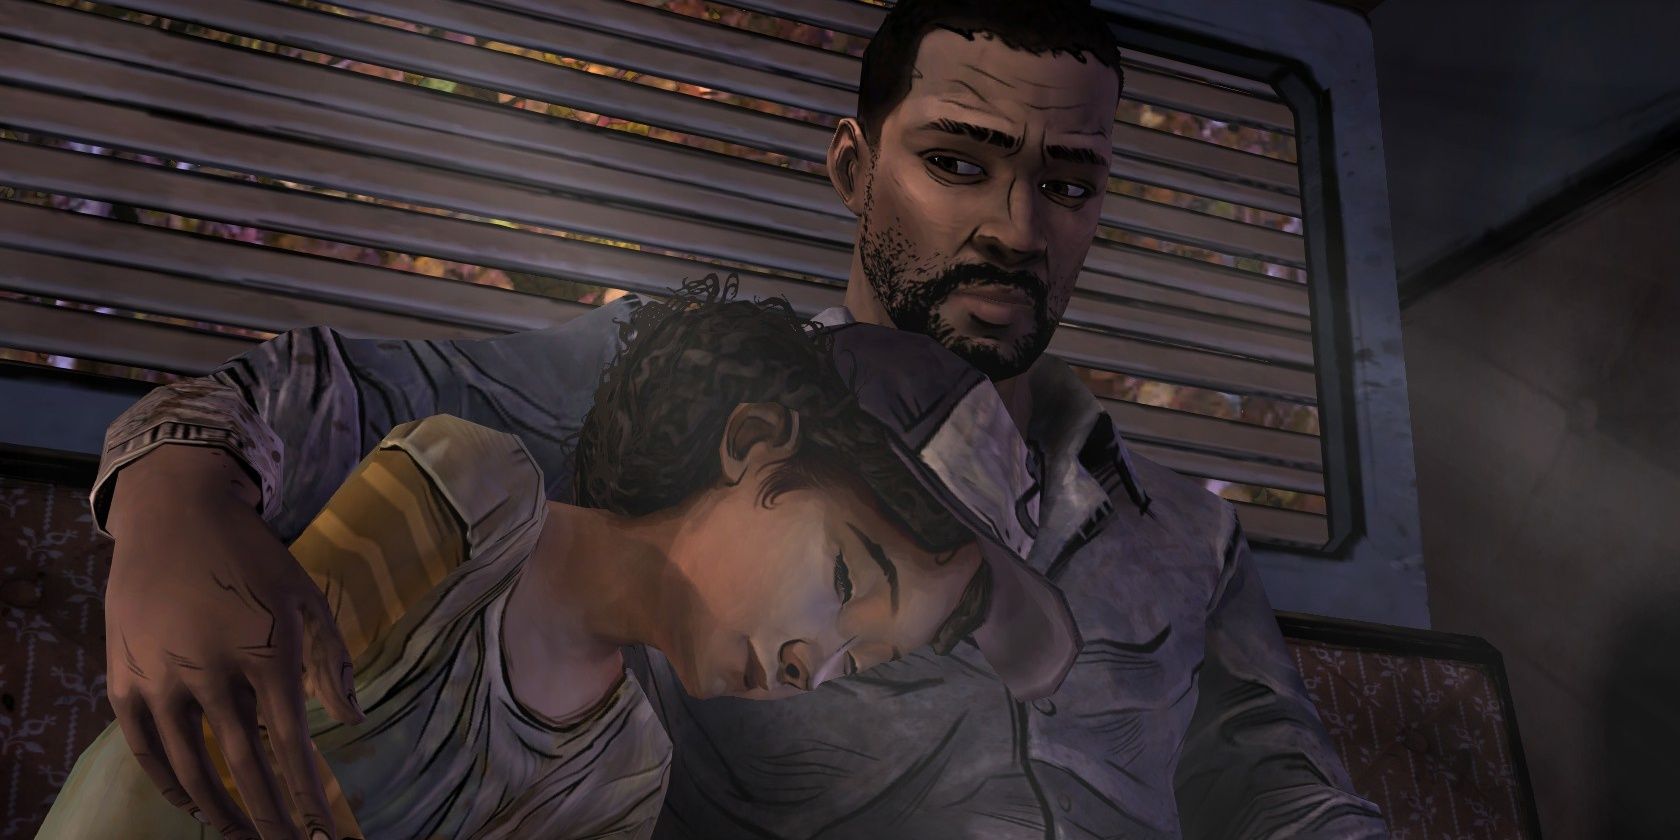 Clementine leaning against Lee in The Walking Dead